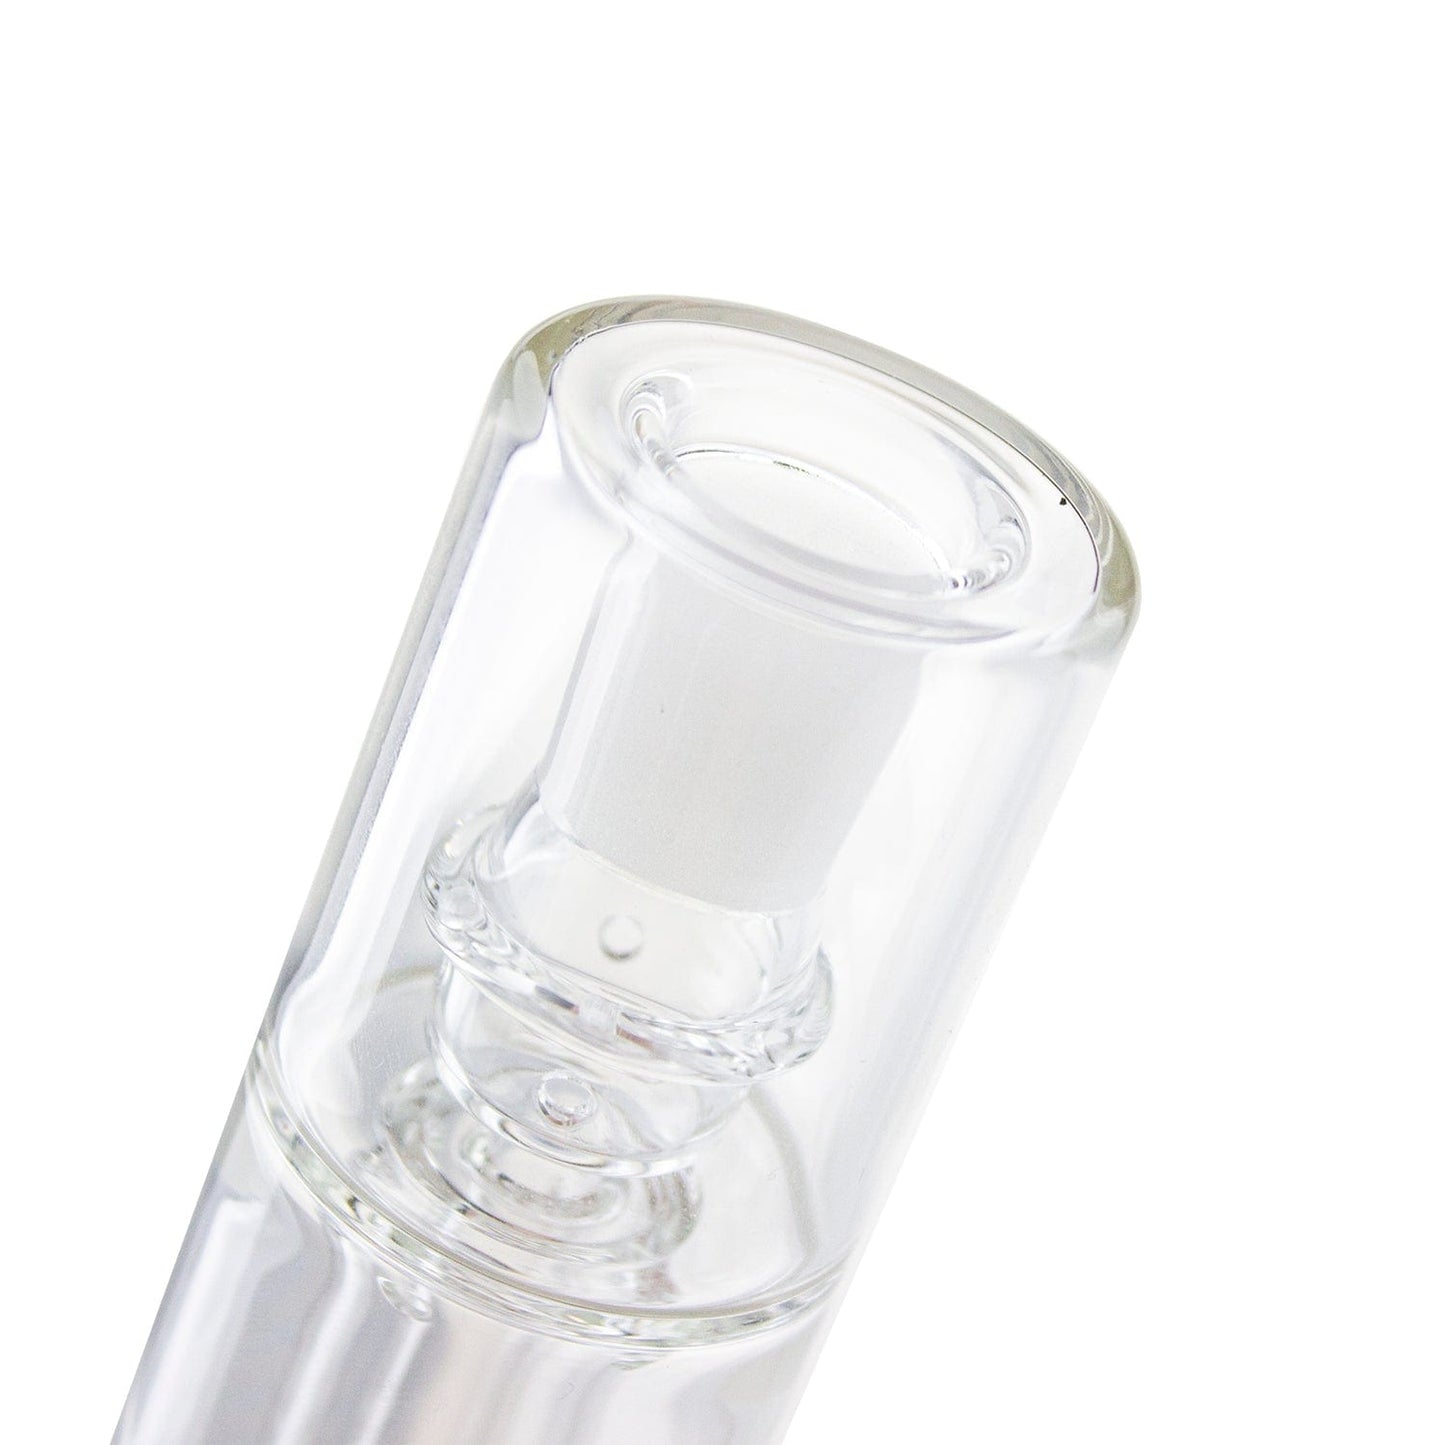 The Glacier Tube - Freeze Coil and Water Bubbler Attachment for the Volcano Hybrid